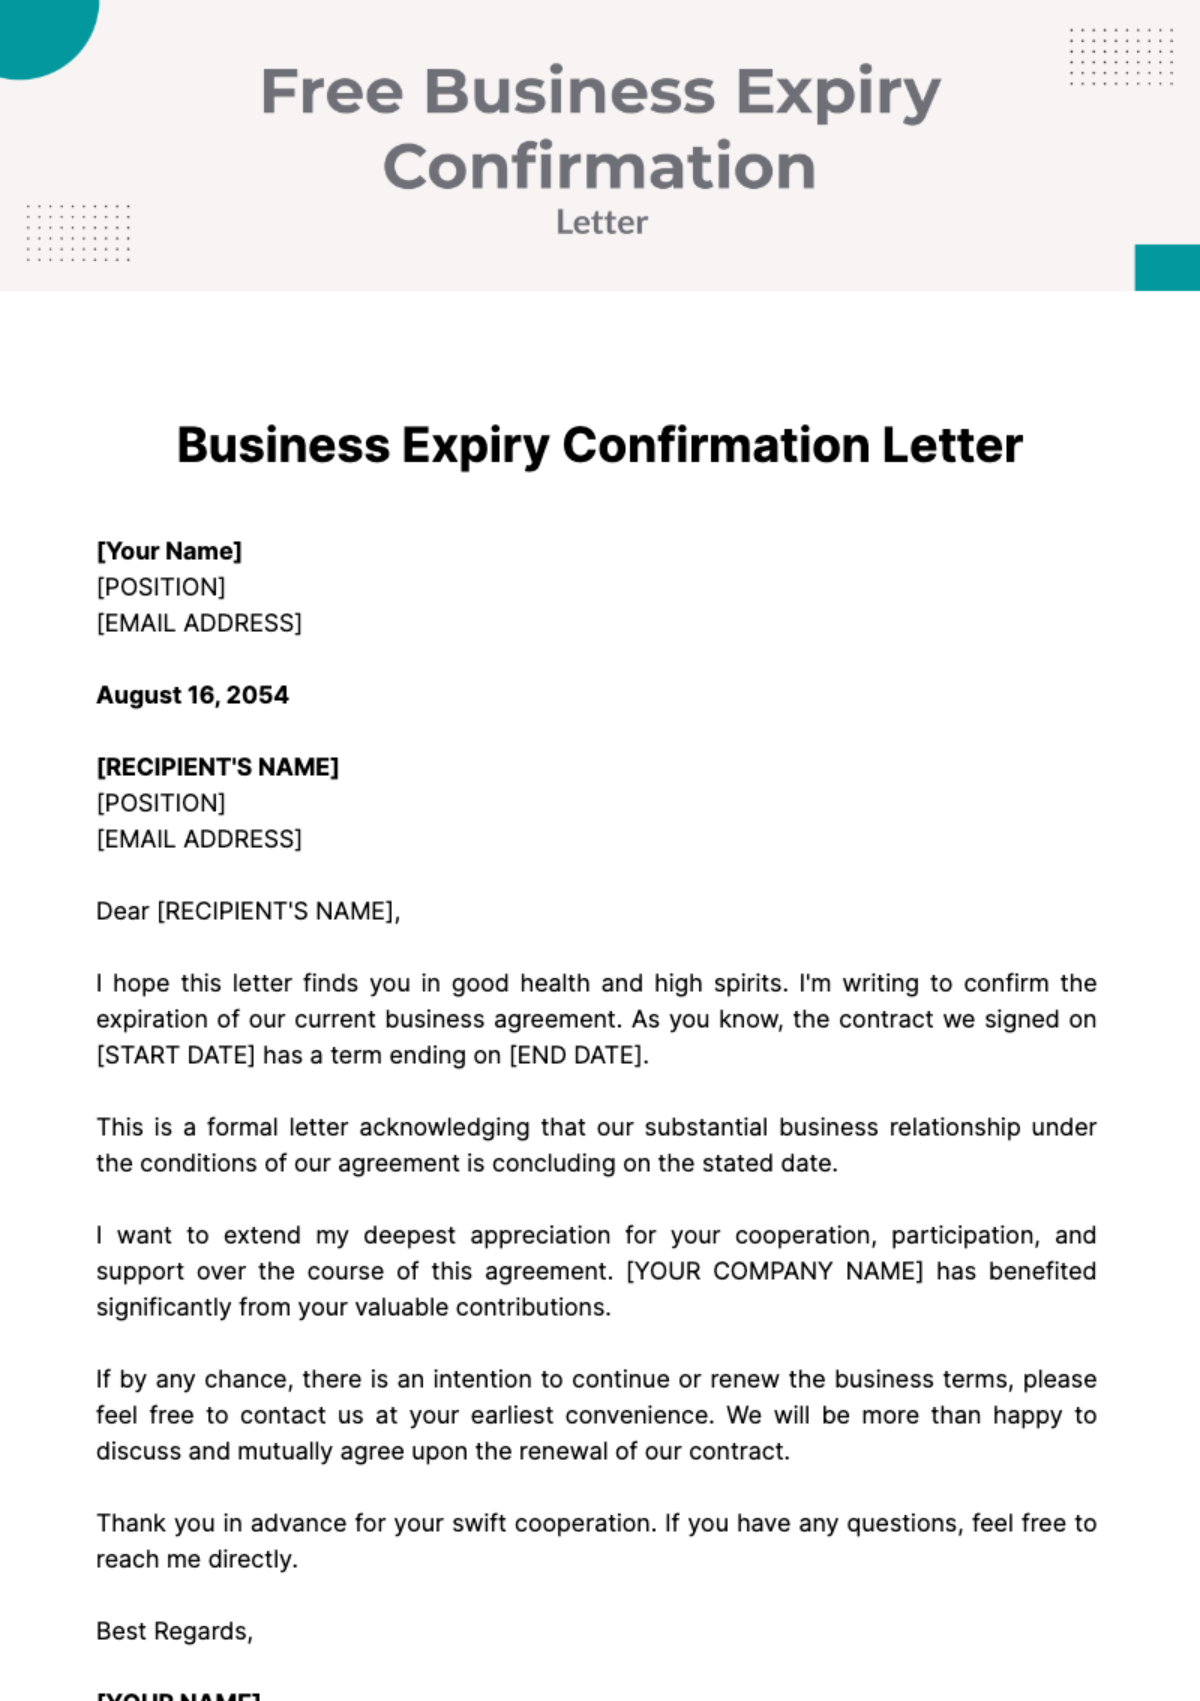 Free Business Expiry Confirmation Letter Template